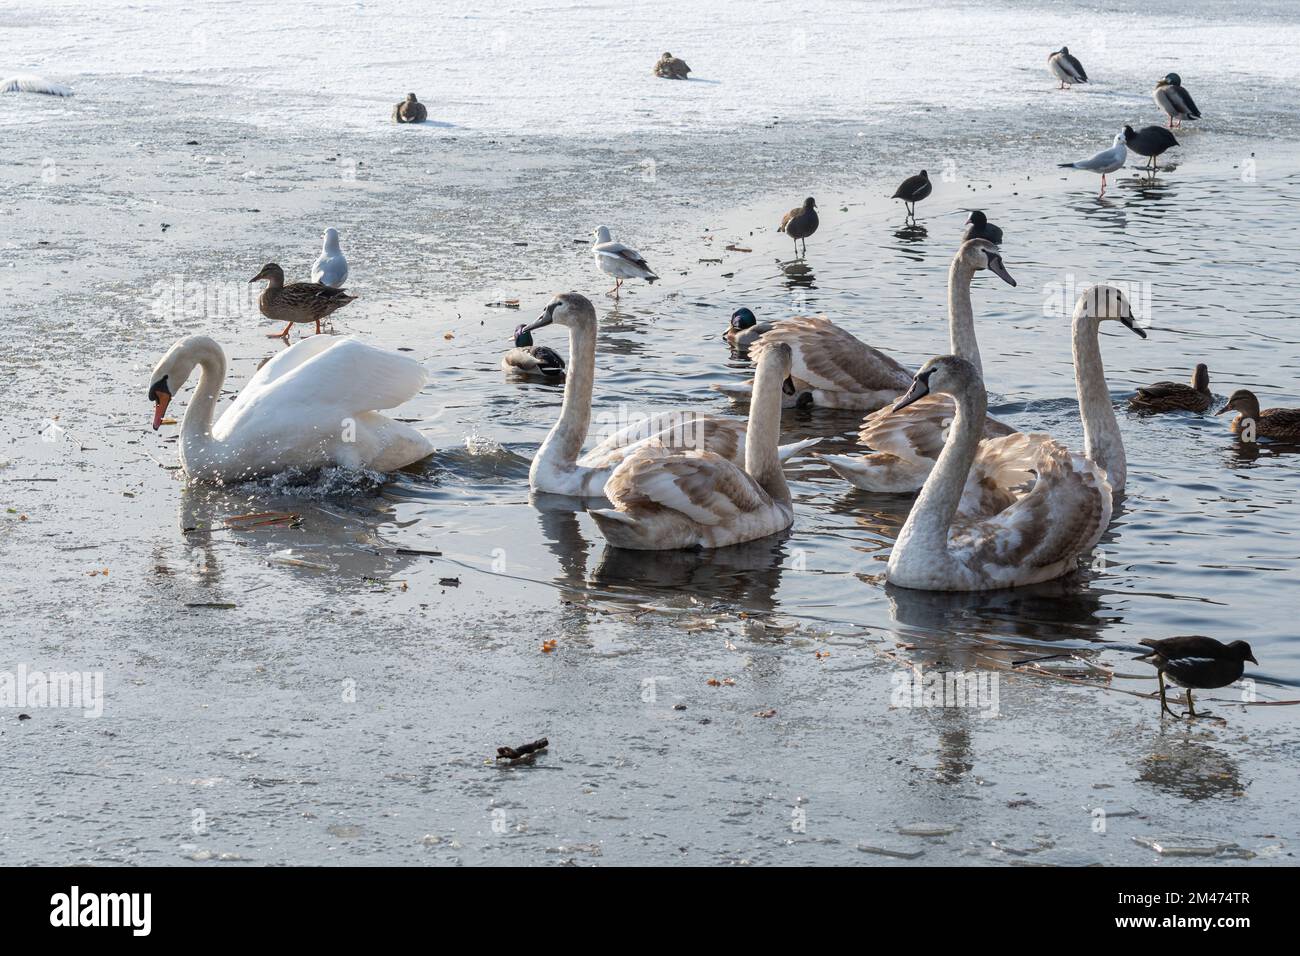 Swans, ducks and wildfowl in winter aggregating in an area of open water on a mostly frozen lake, Fleet Pond, Hampshire, England, UK Stock Photo